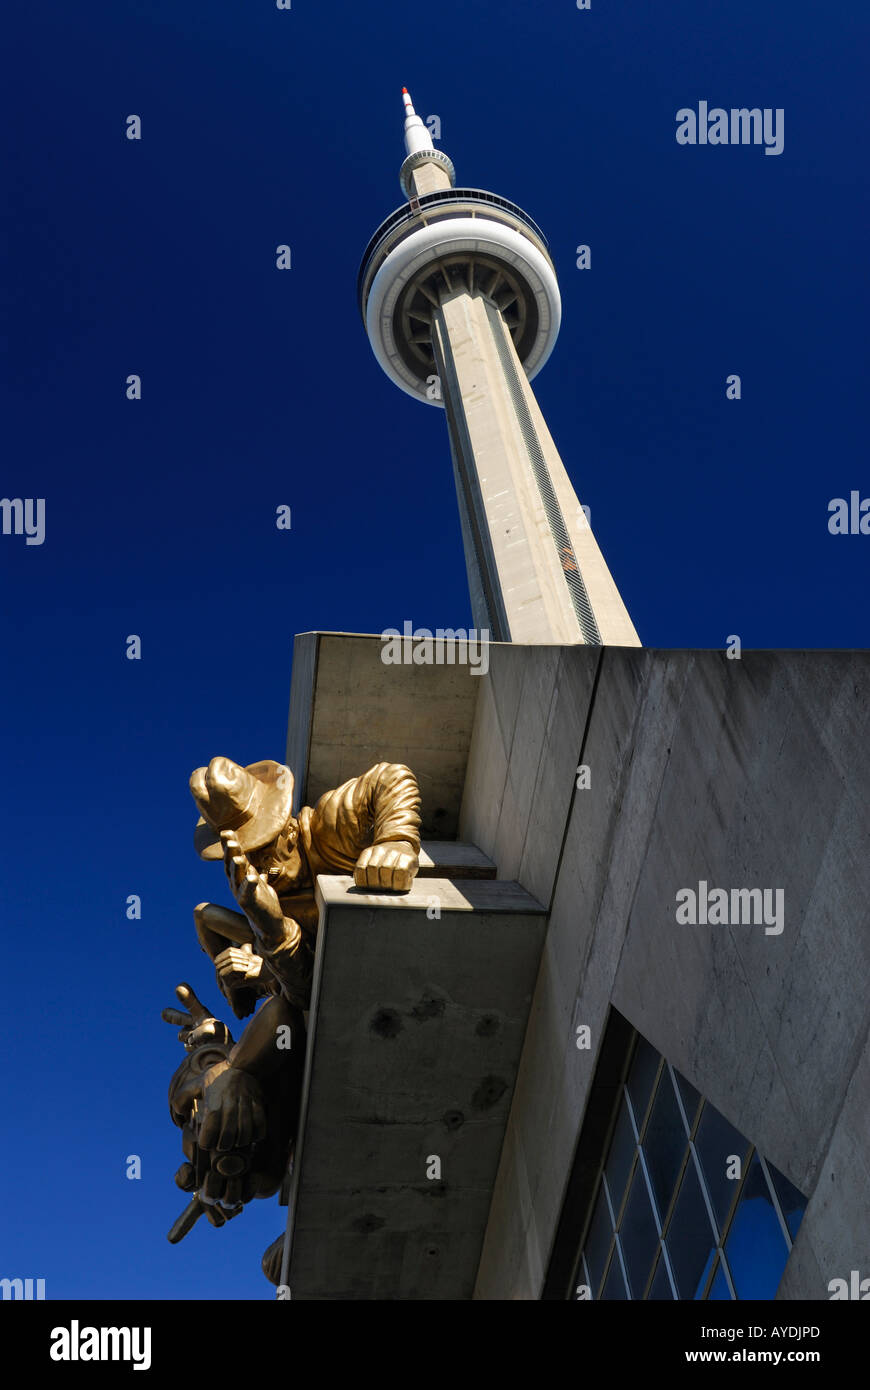 Rogers centre spectator sculpture and CN tower against a blue sky Toronto Stock Photo